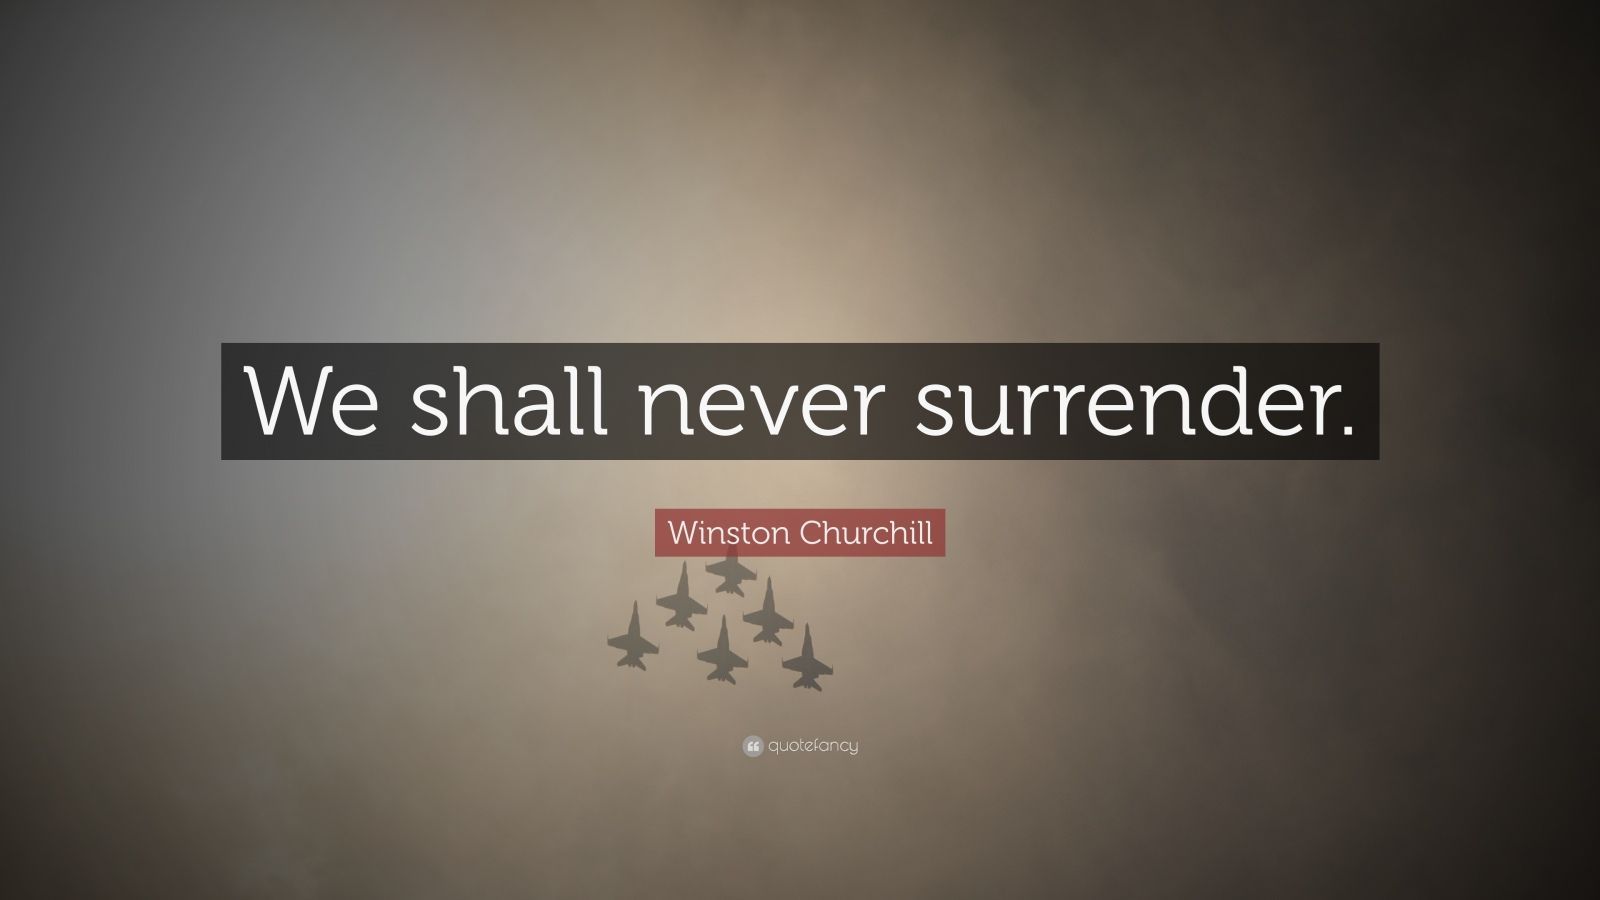 Winston Churchill Quote: “We shall never surrender.” (12 wallpaper)